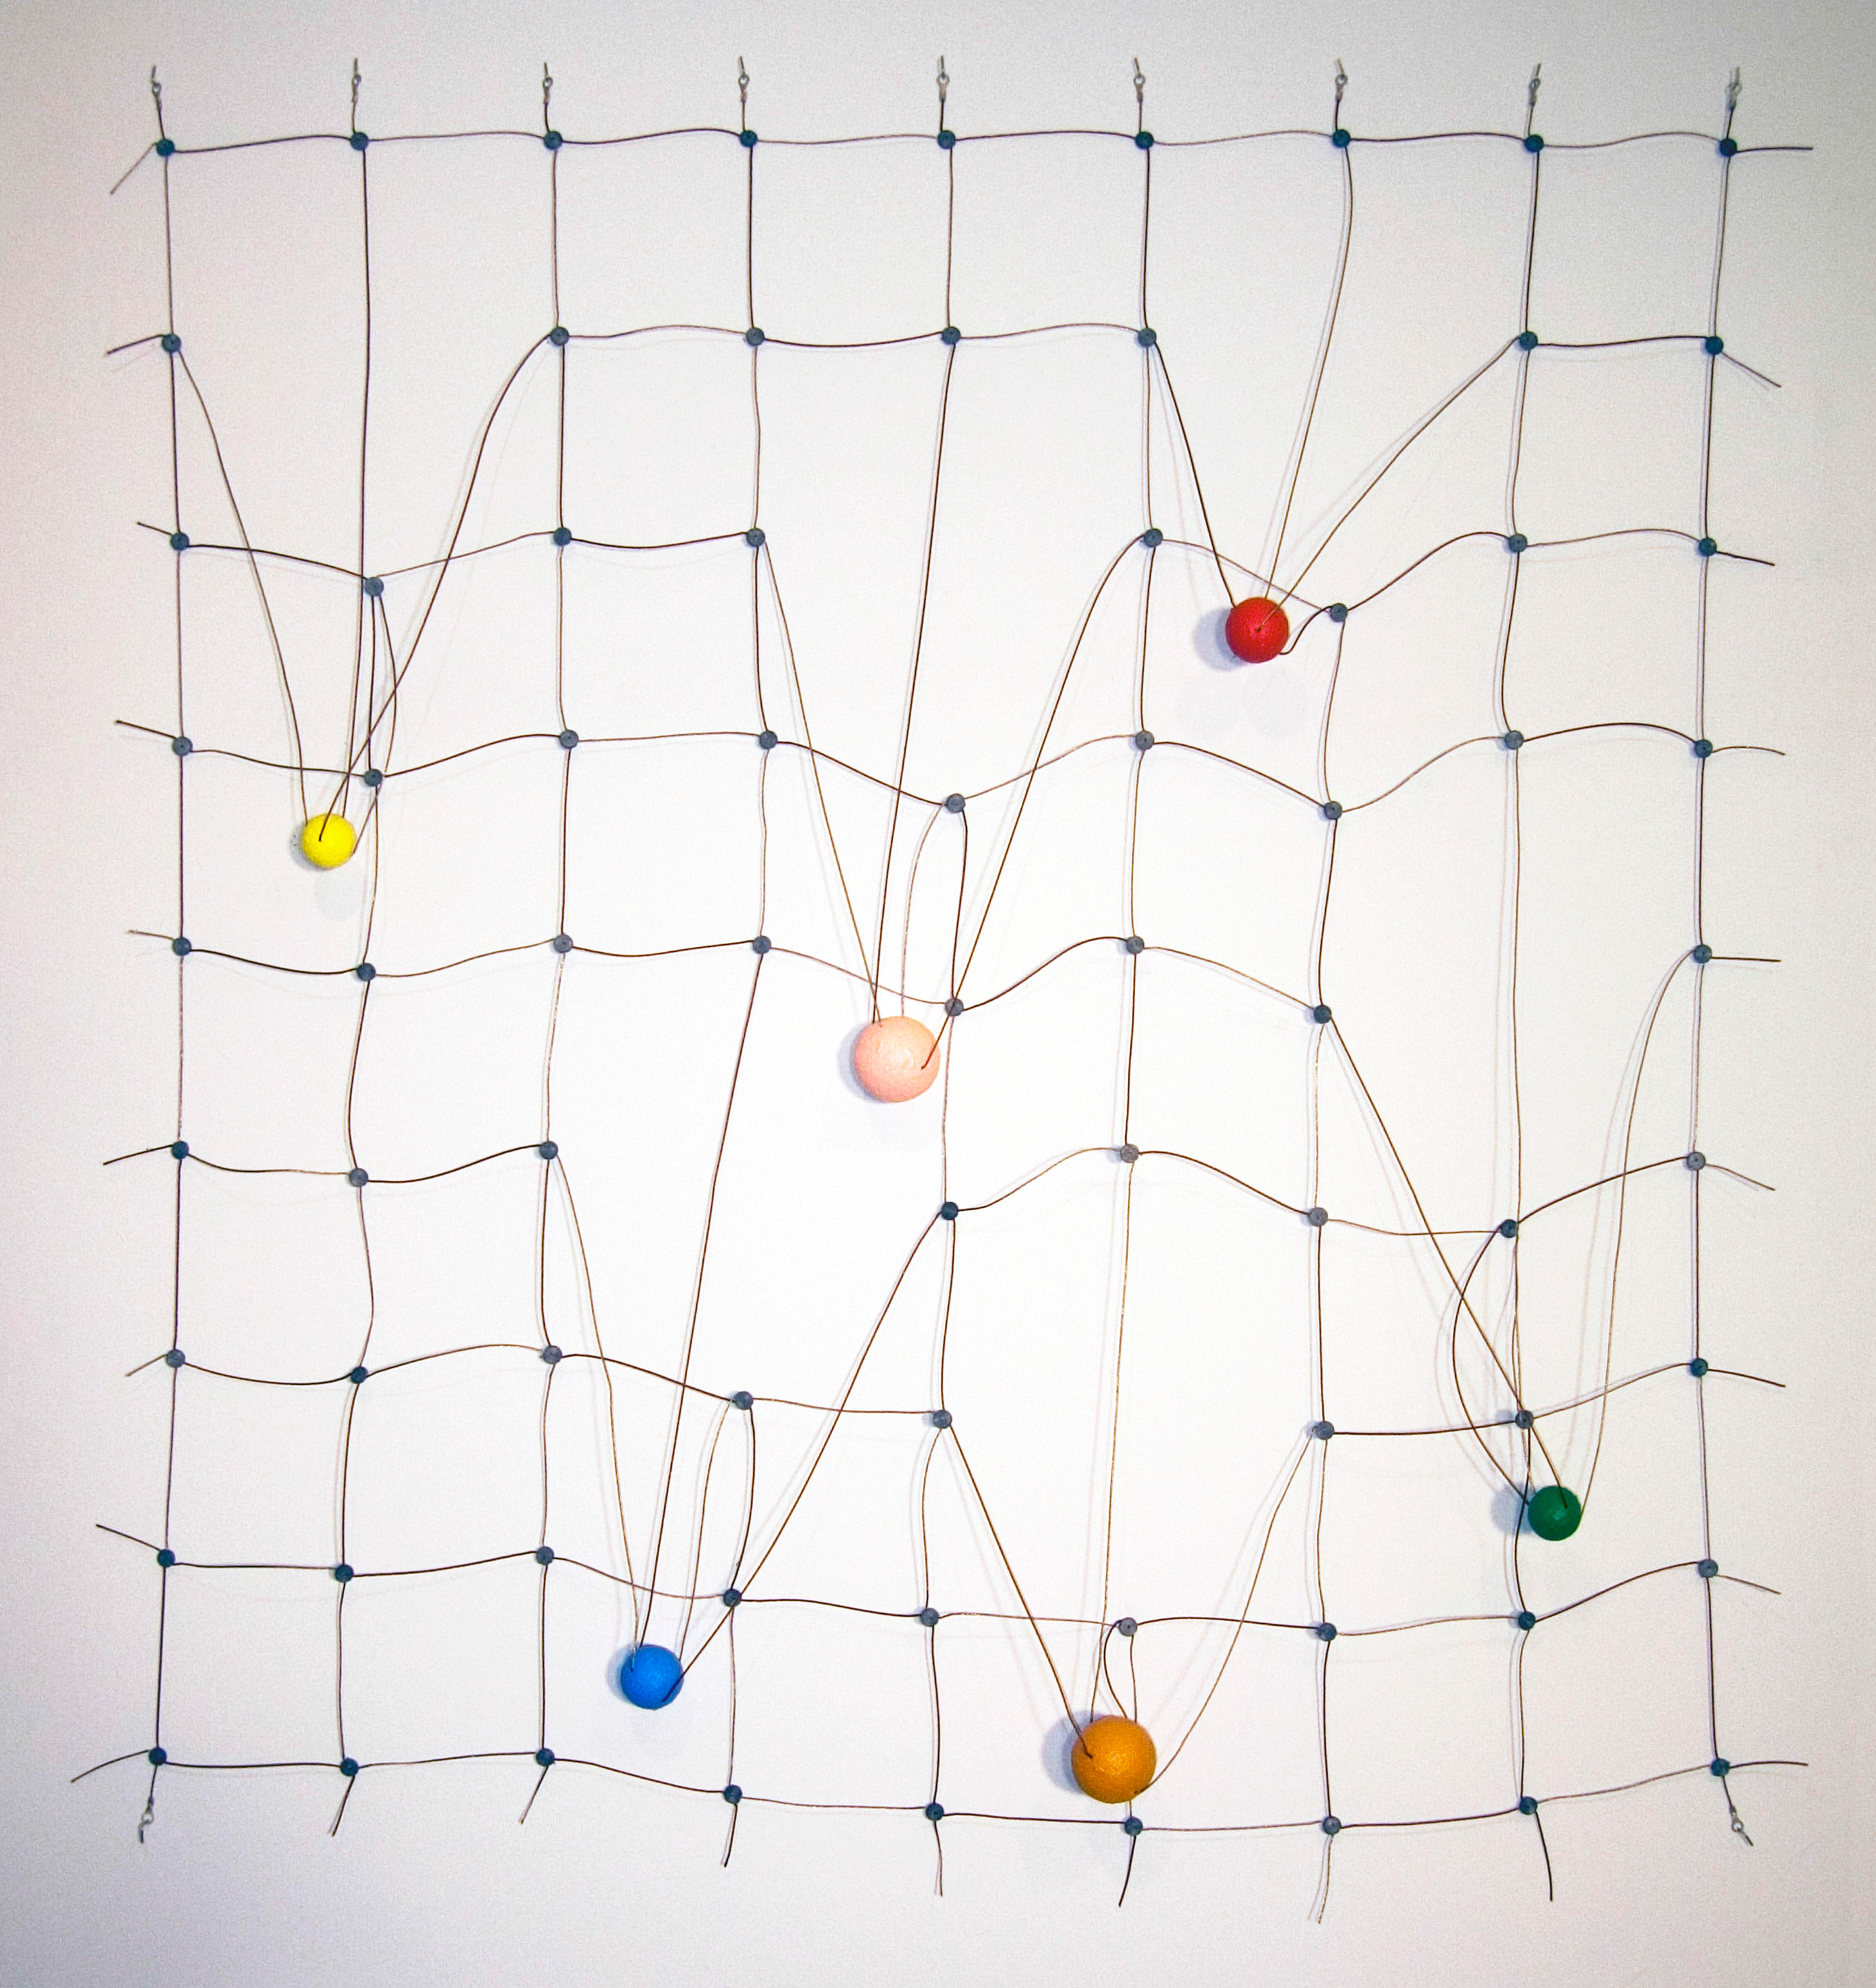 Catawampus, ©2005<br>Monel wire rope, Phosphor bronze wire rope, lead seals, ring terminals wood and acrylic paint. <br>
45h x 41.5w x 3d (inches) <br>
Estate of Charles Fahlen <br>
Exhibited: Steven Wolf Fine Arts, 2008